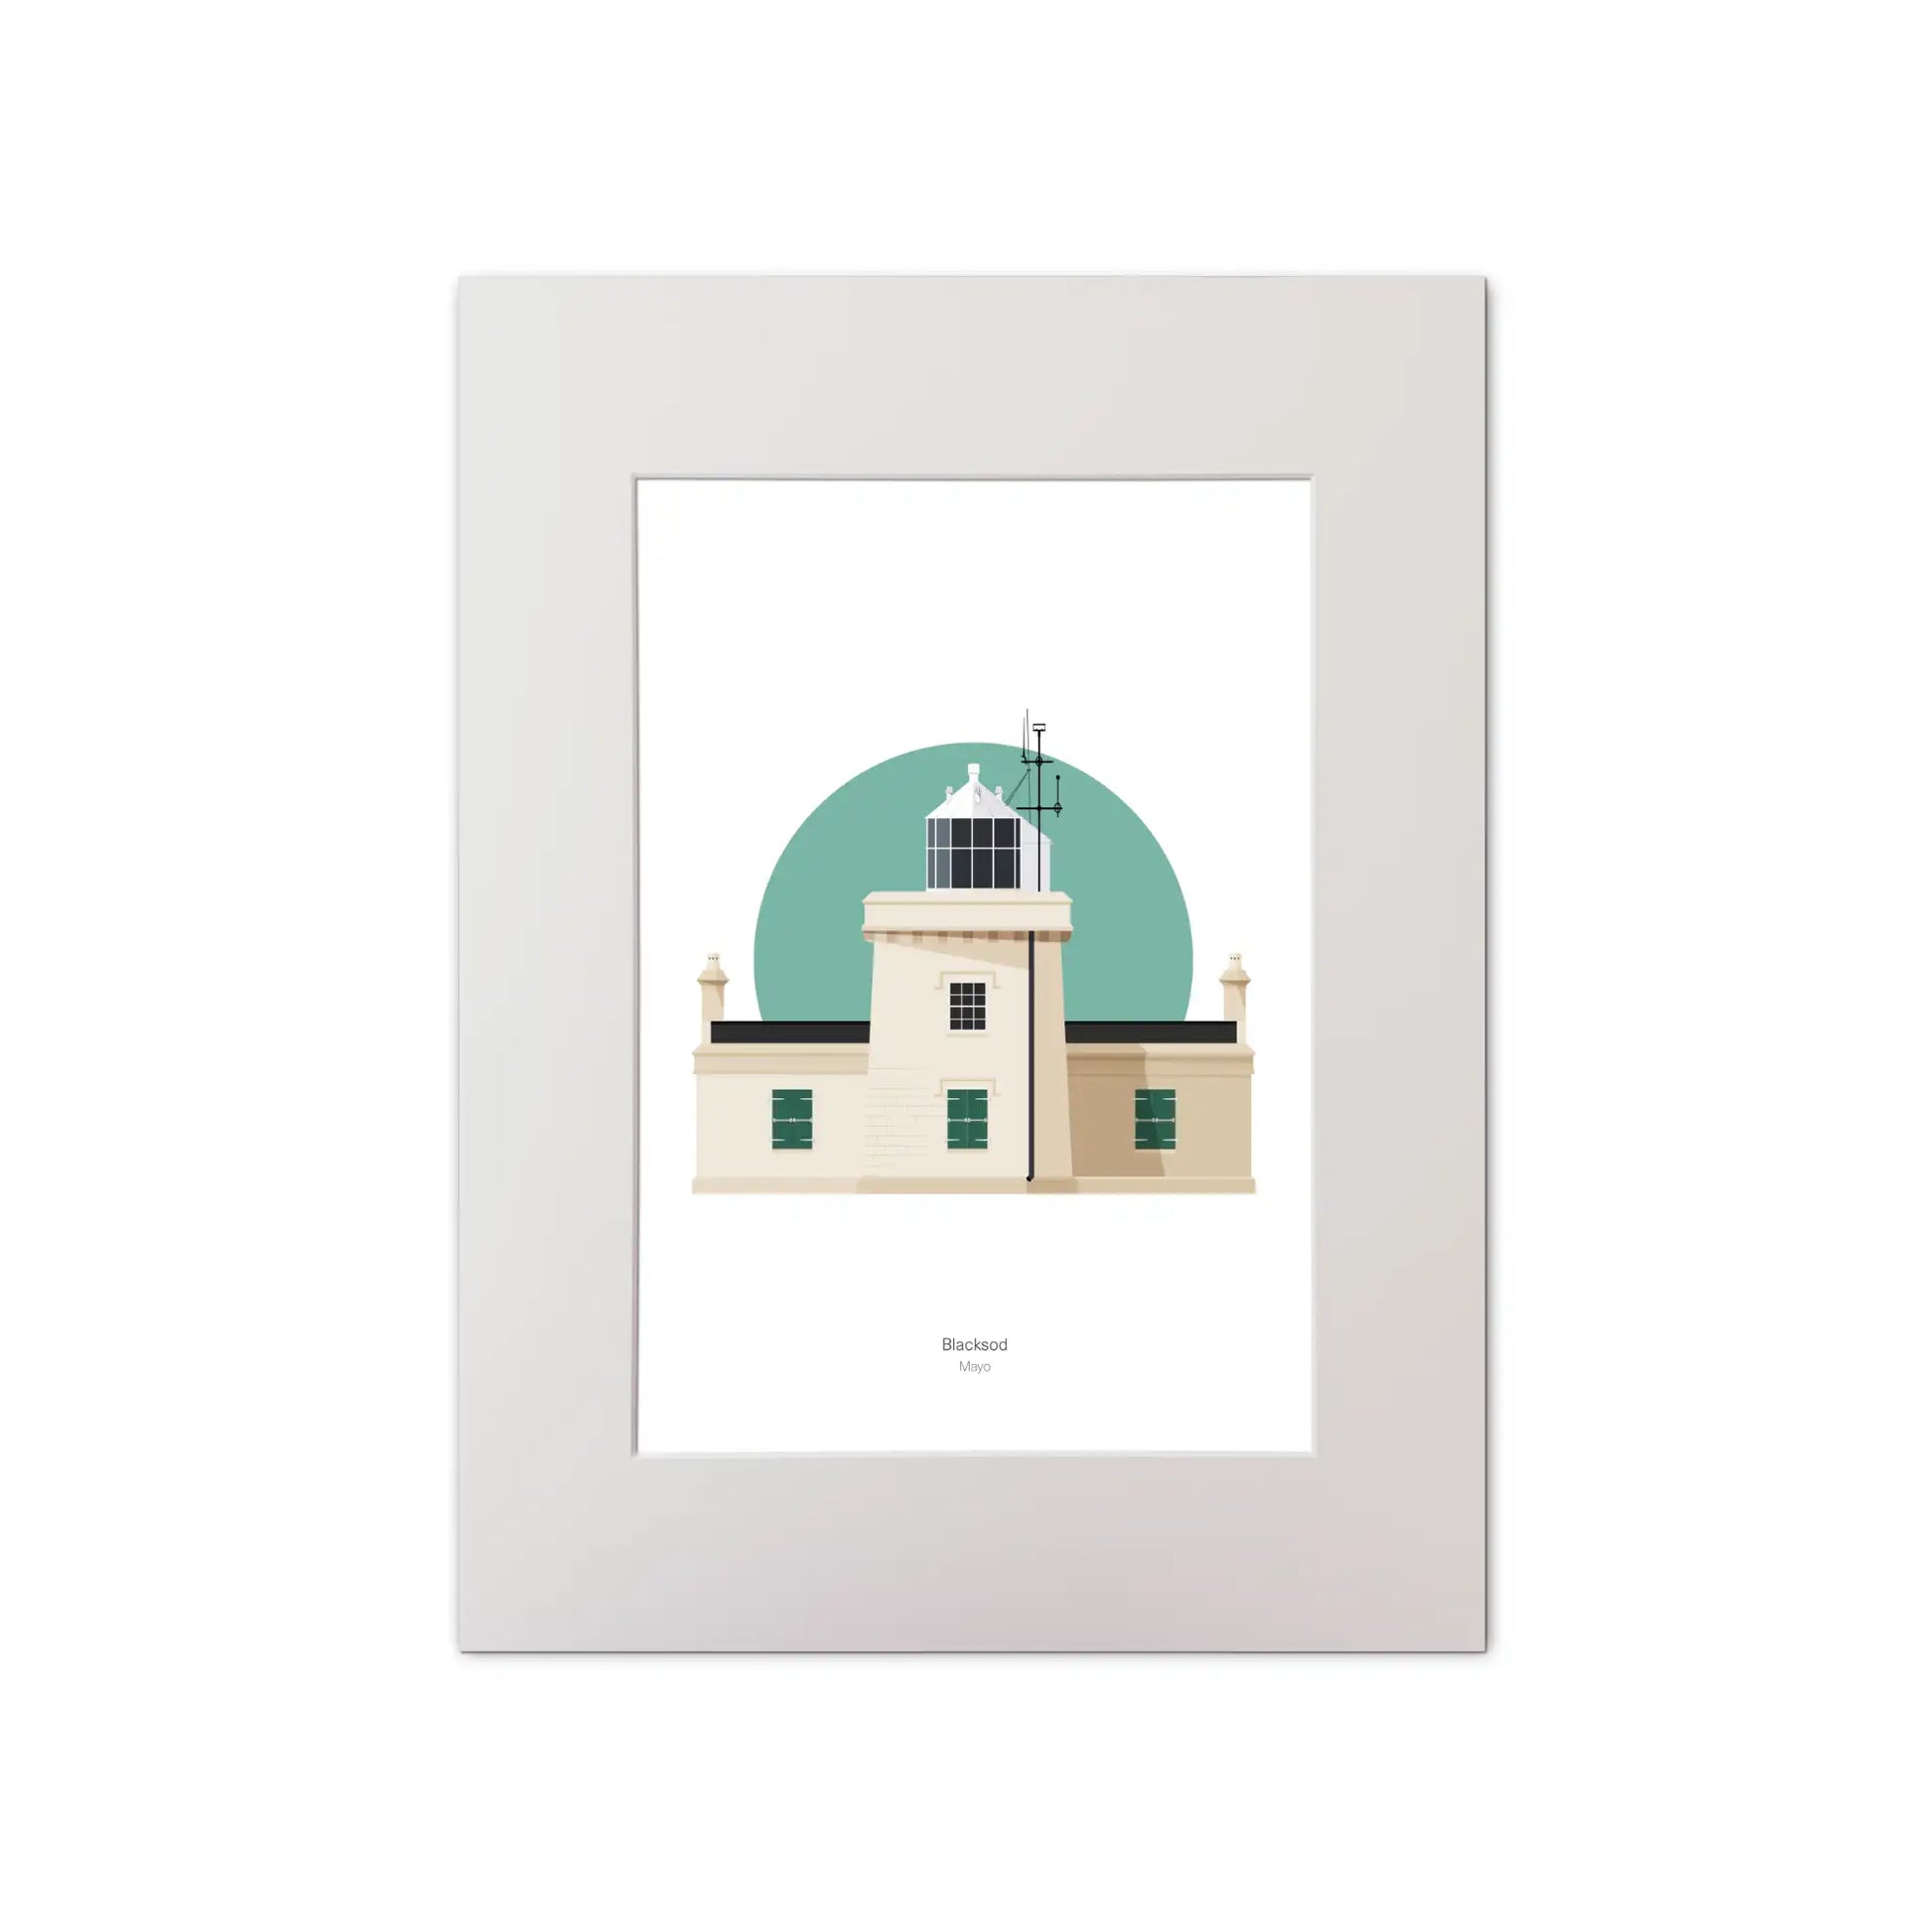 Illustration of Blacksod lighthouse on a white background inside light blue square, mounted and measuring 30x40cm.